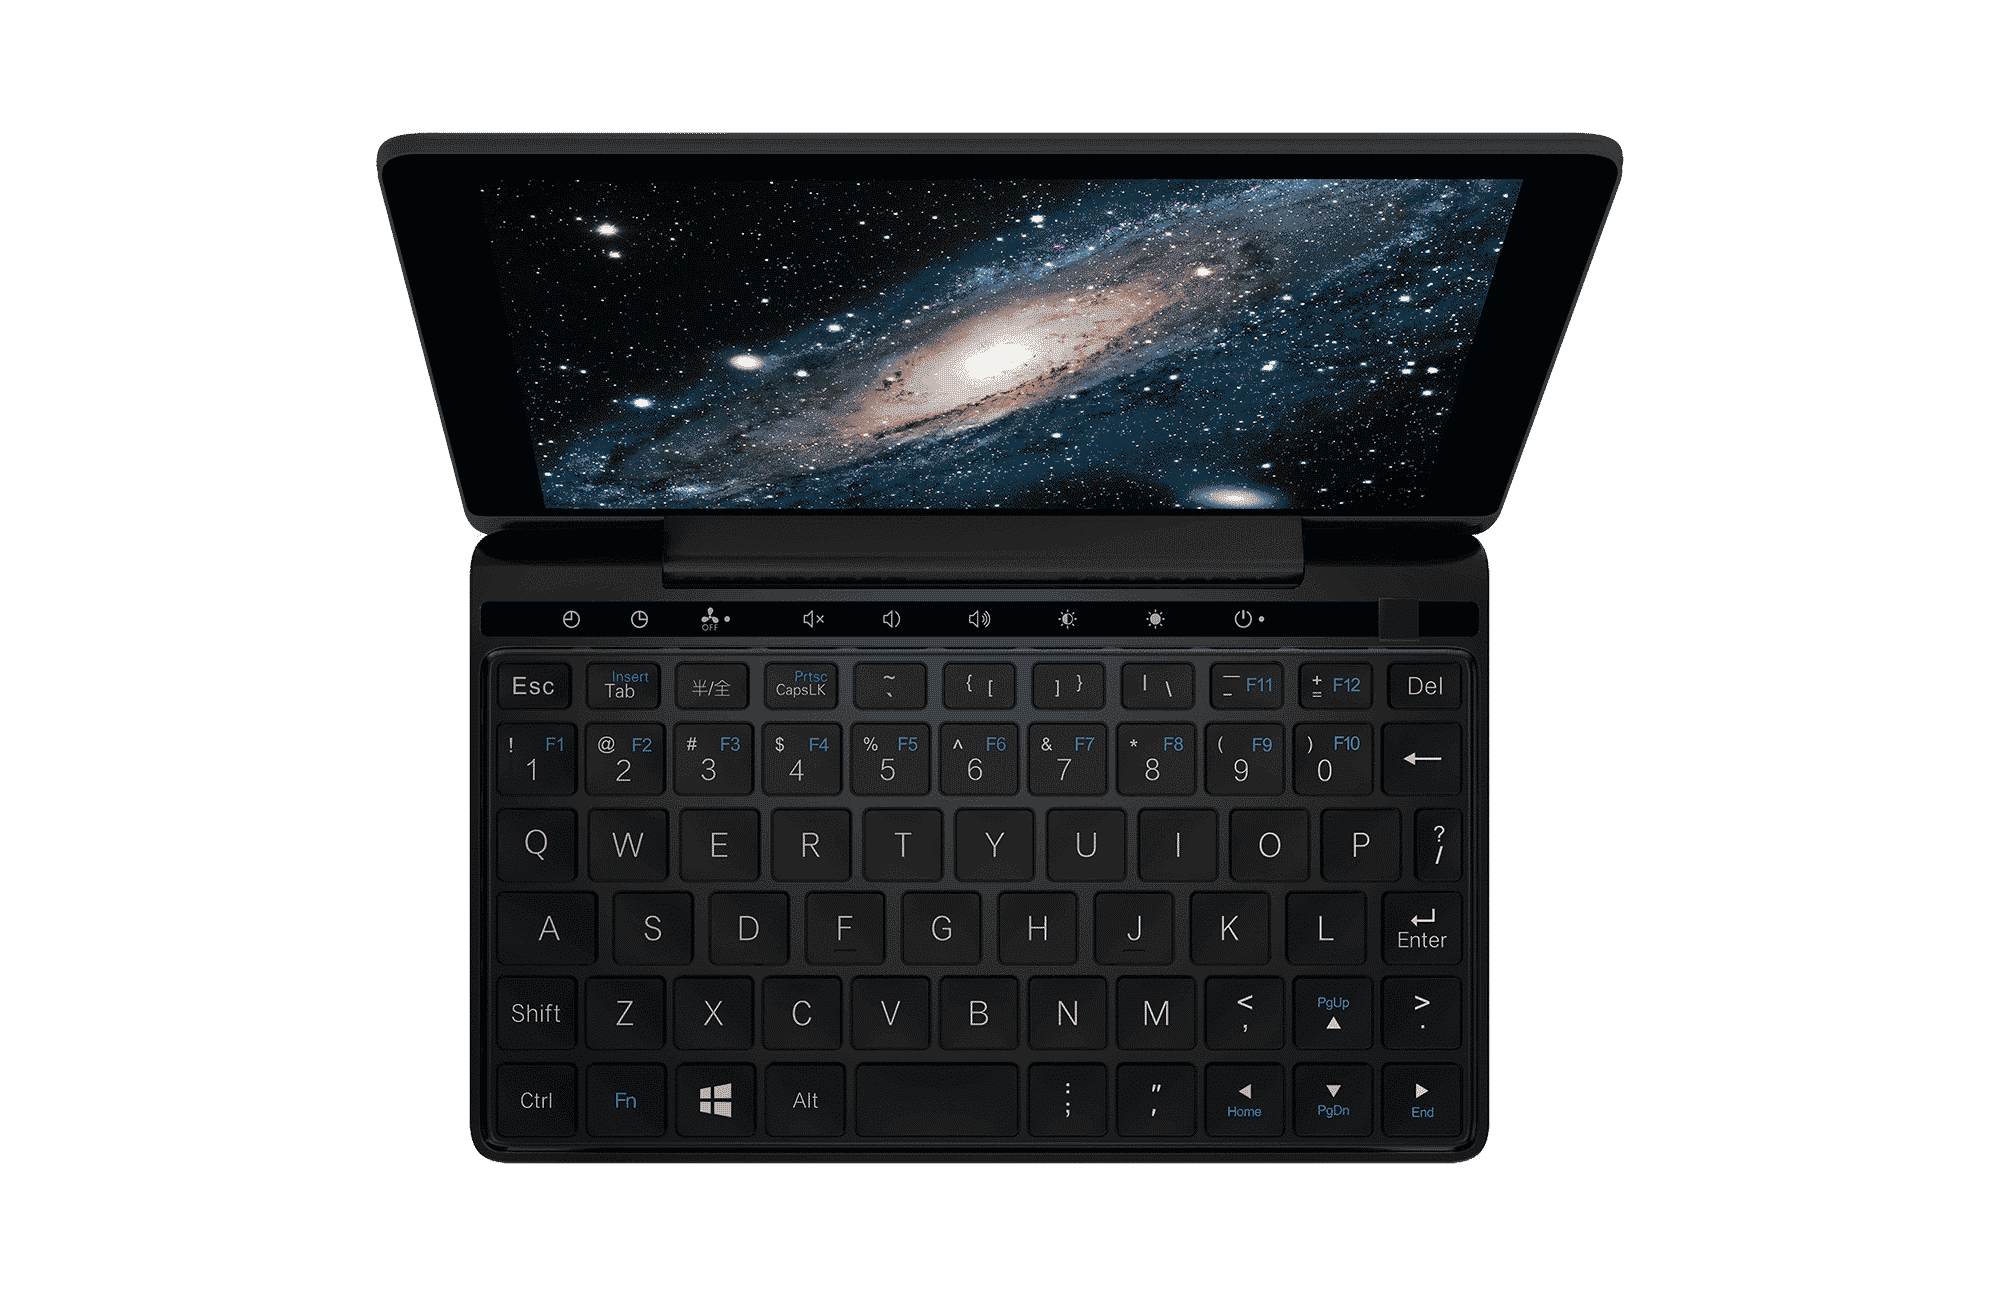 GPD Pocket 2 Amber Black Intel Core m3-8100y Ultrabook shown from the top